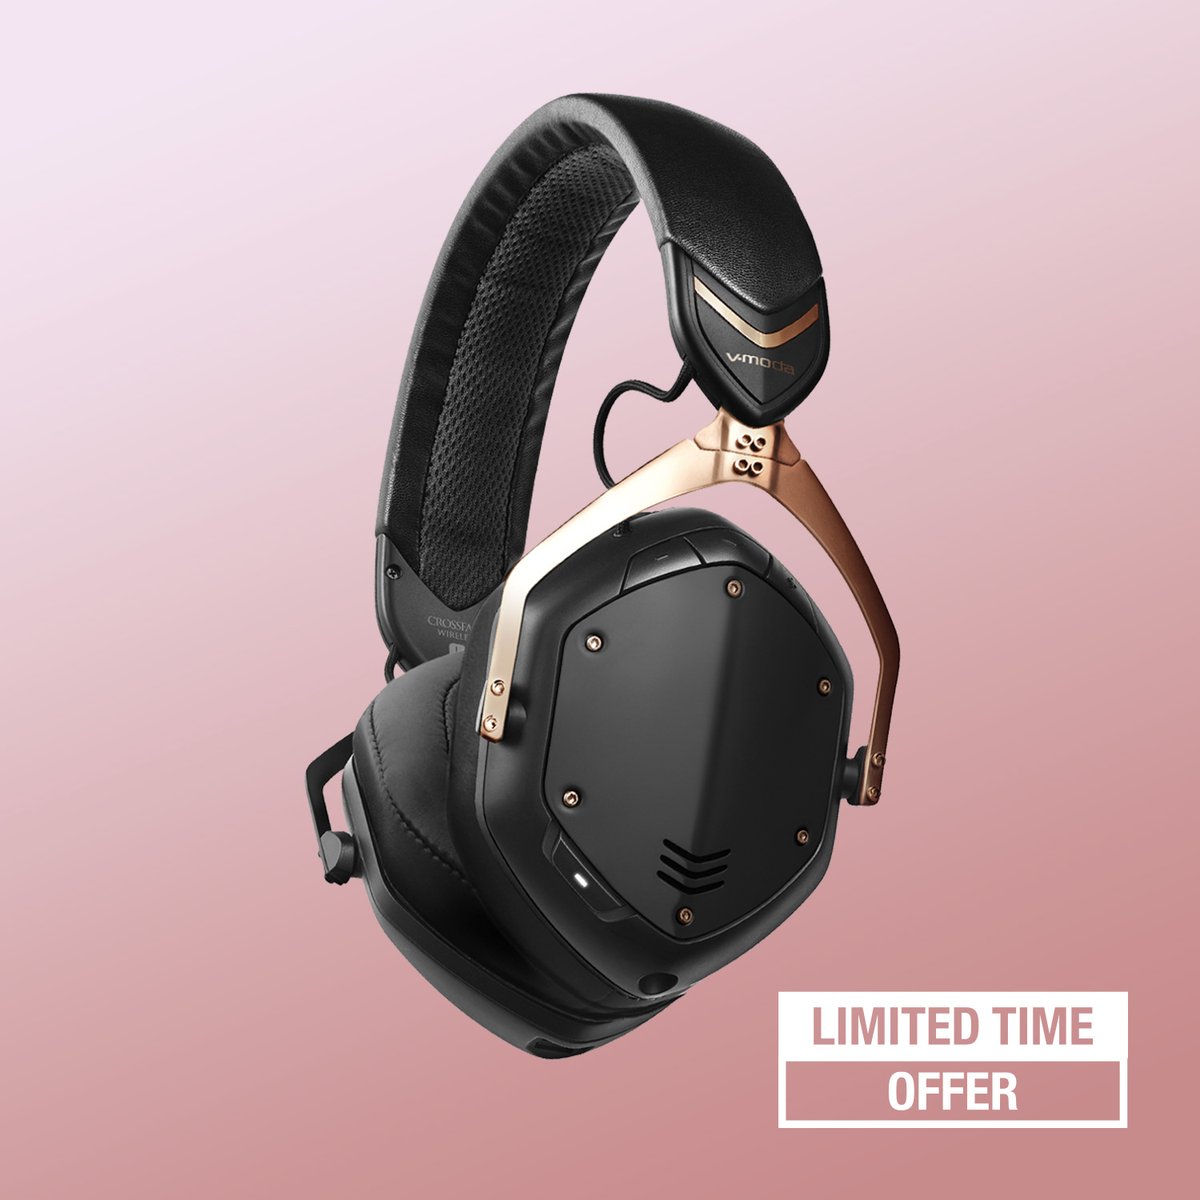 Your own customizable Bluetooth headphones AND an extra $50 in your pocket? Don't mind if we do 👀 Join the V-MODA club with Crossfade 2 Wireless Codex Edition for less while you still can: v-moda.com/ExperienceMore